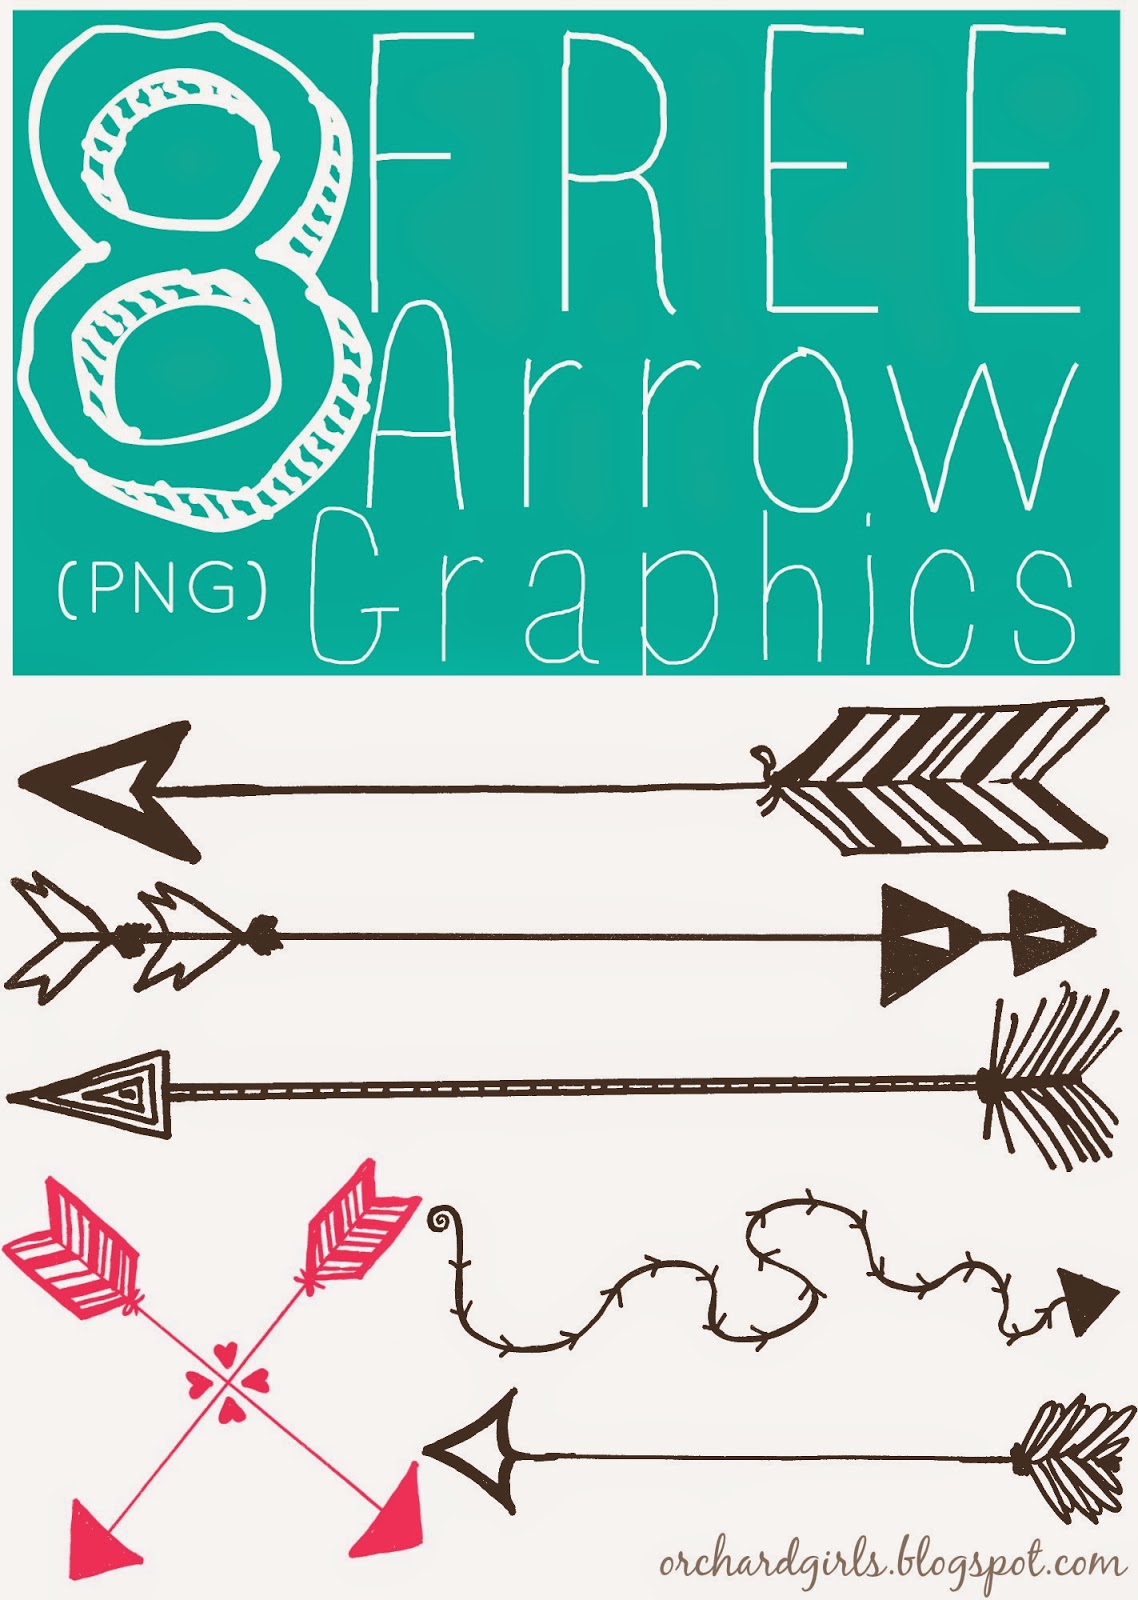 FREE Arrow Graphics (PNG) by Orchard Girls